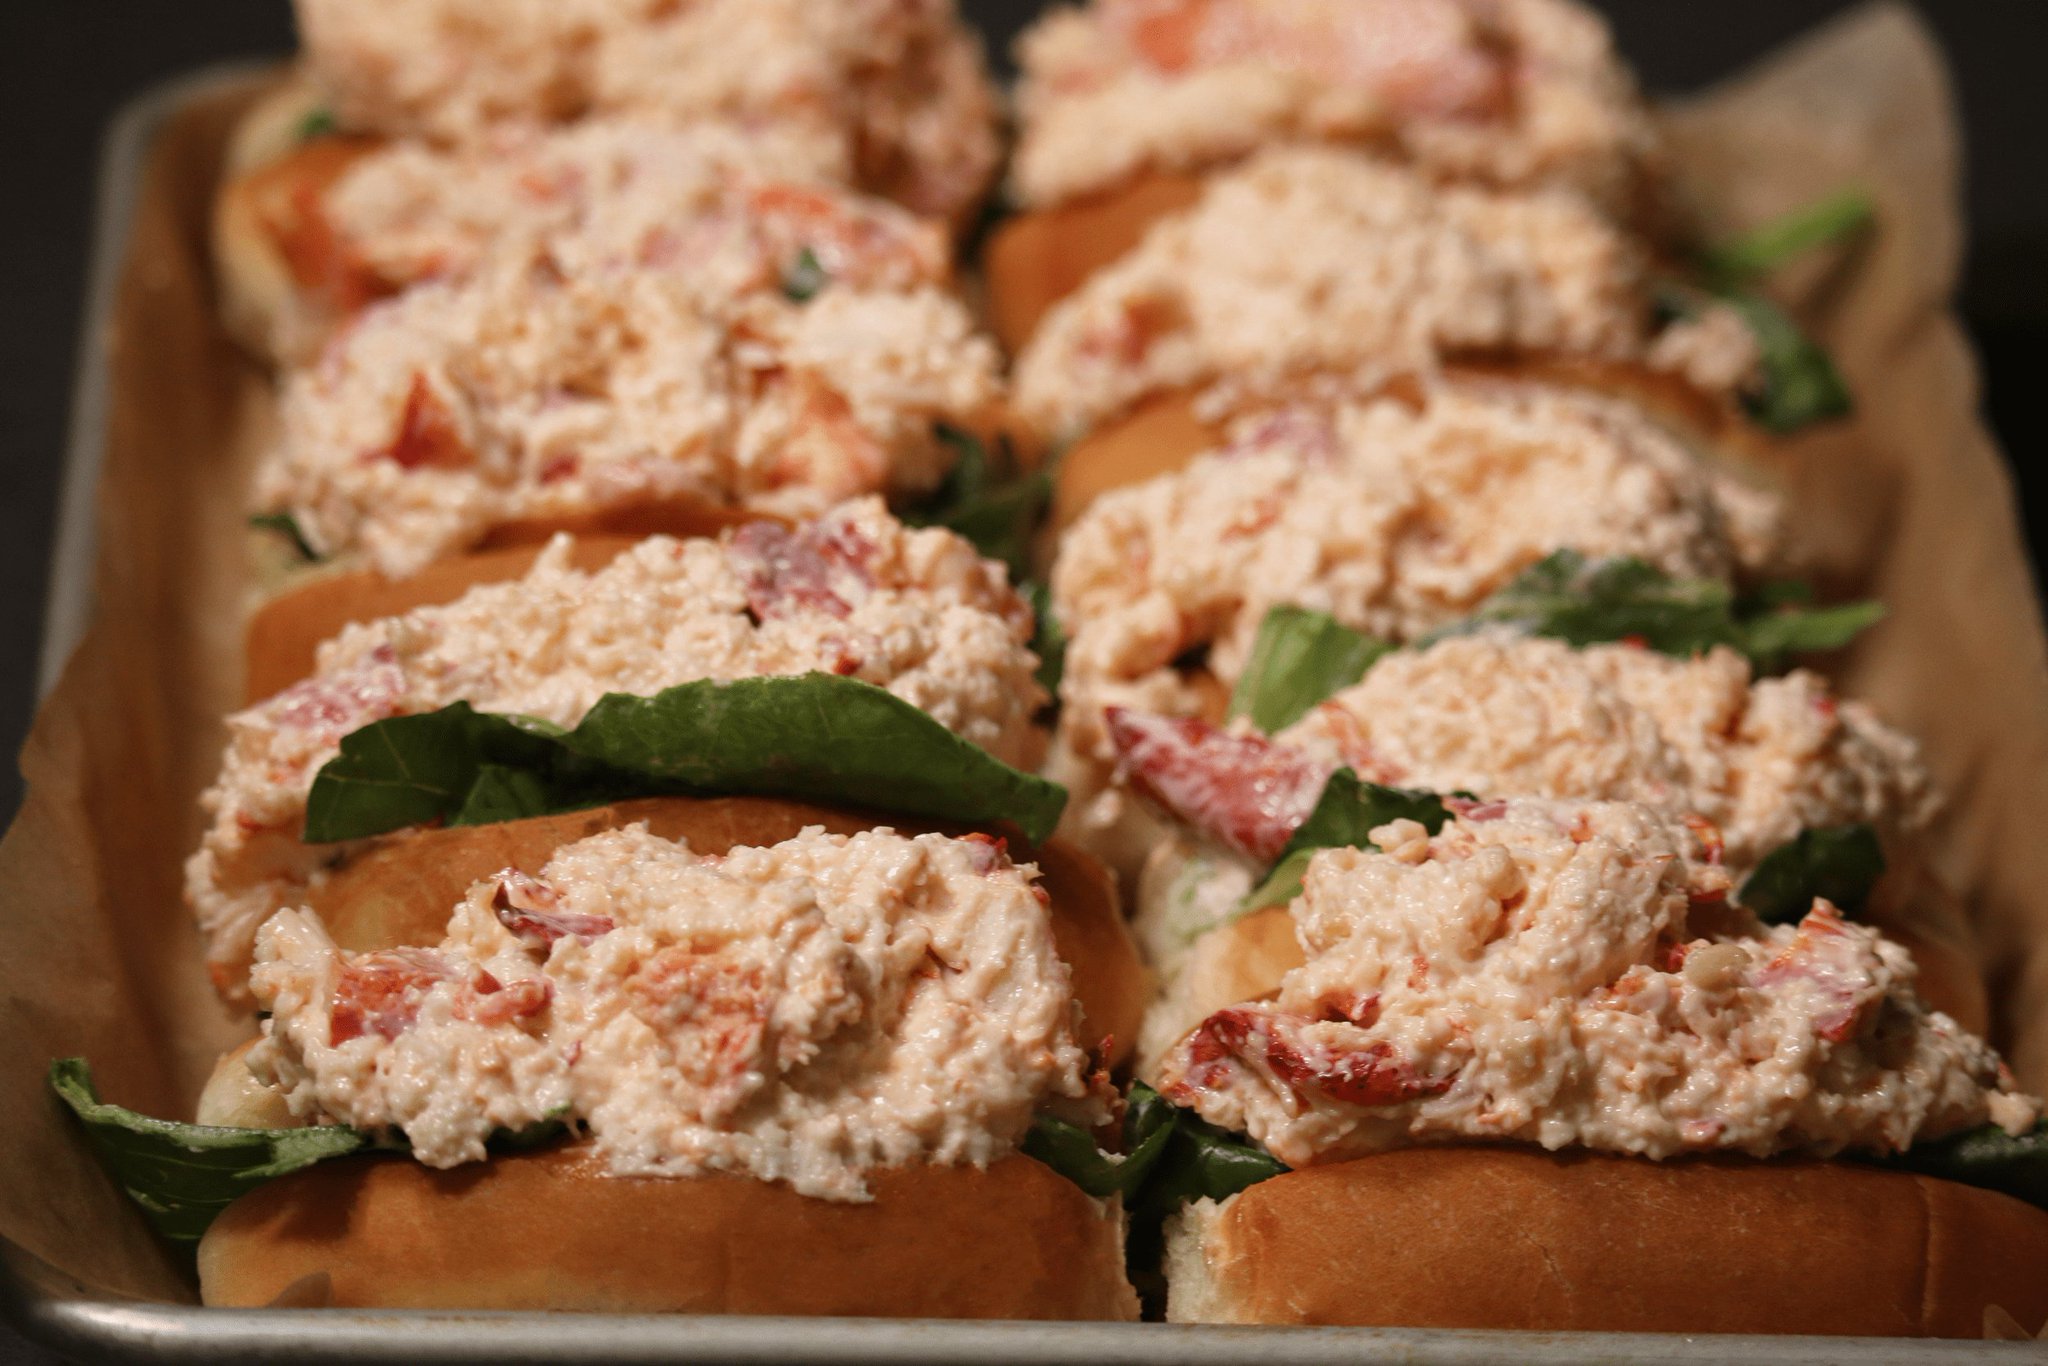 Market Basket On Twitter Our Lobster Rolls Are Made From 100 North Atlantic Lobster And They Re 100 Delicious Find Them In This Week S Flyer Https T Co Cco82wq8yj Https T Co 7rmipyjcsv [ 1366 x 2048 Pixel ]